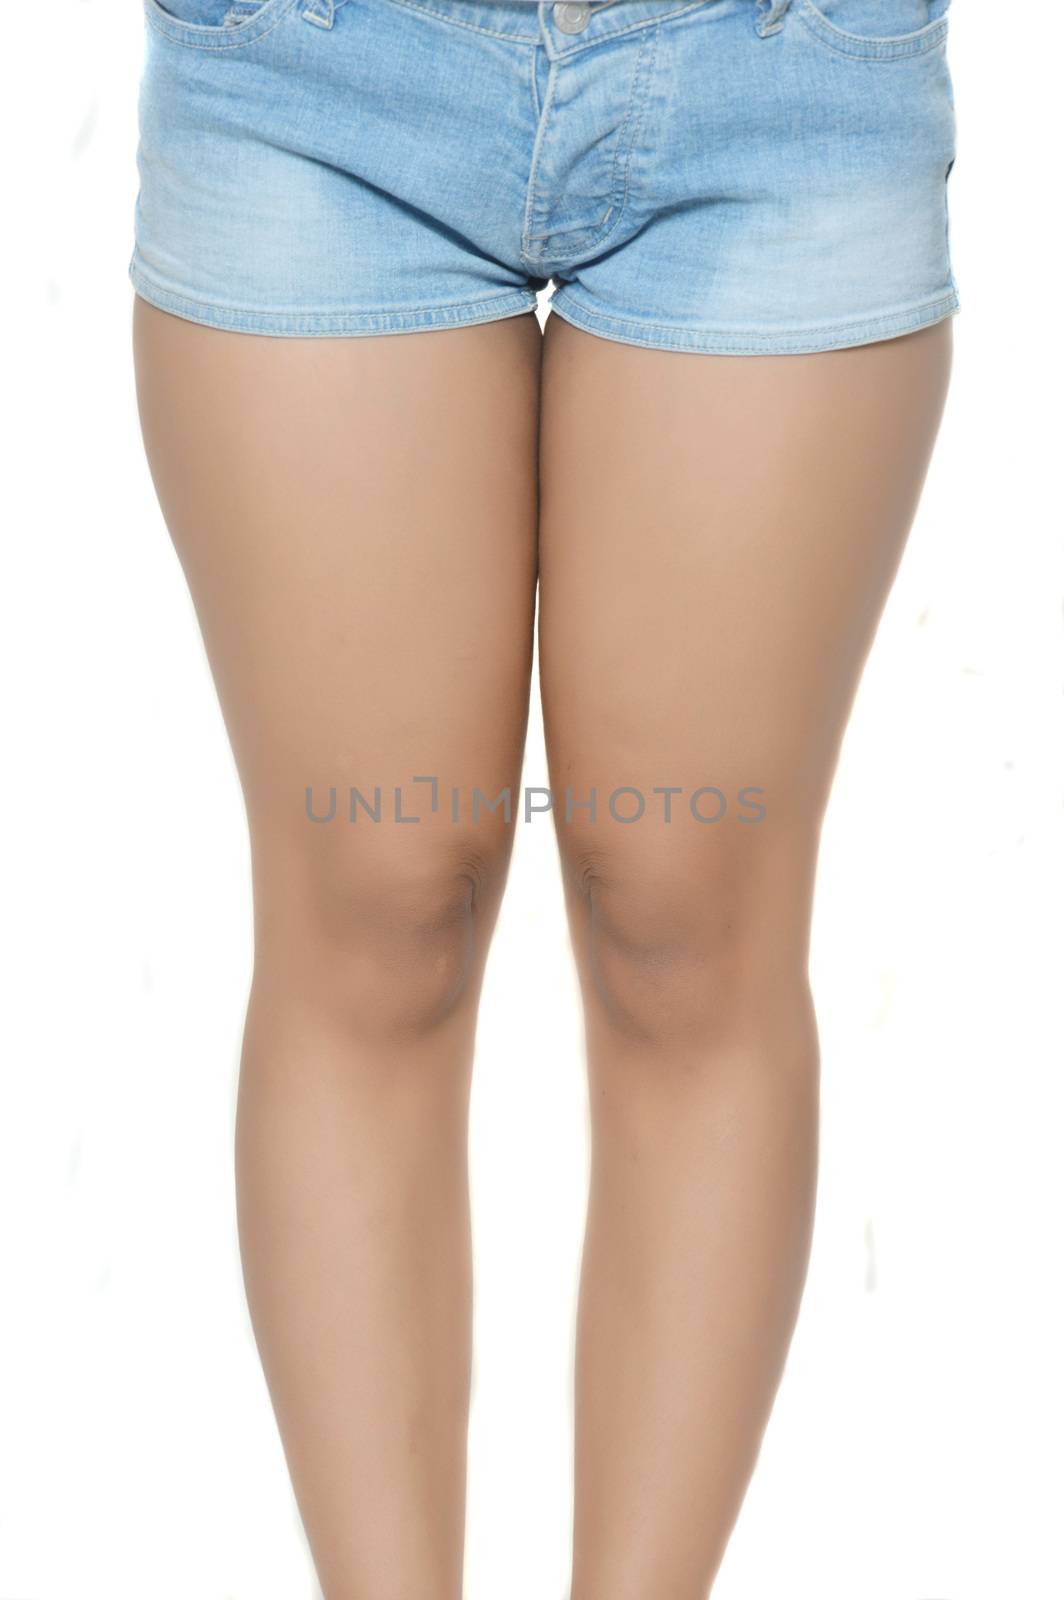 asian young woman's thigh wearing short jeans